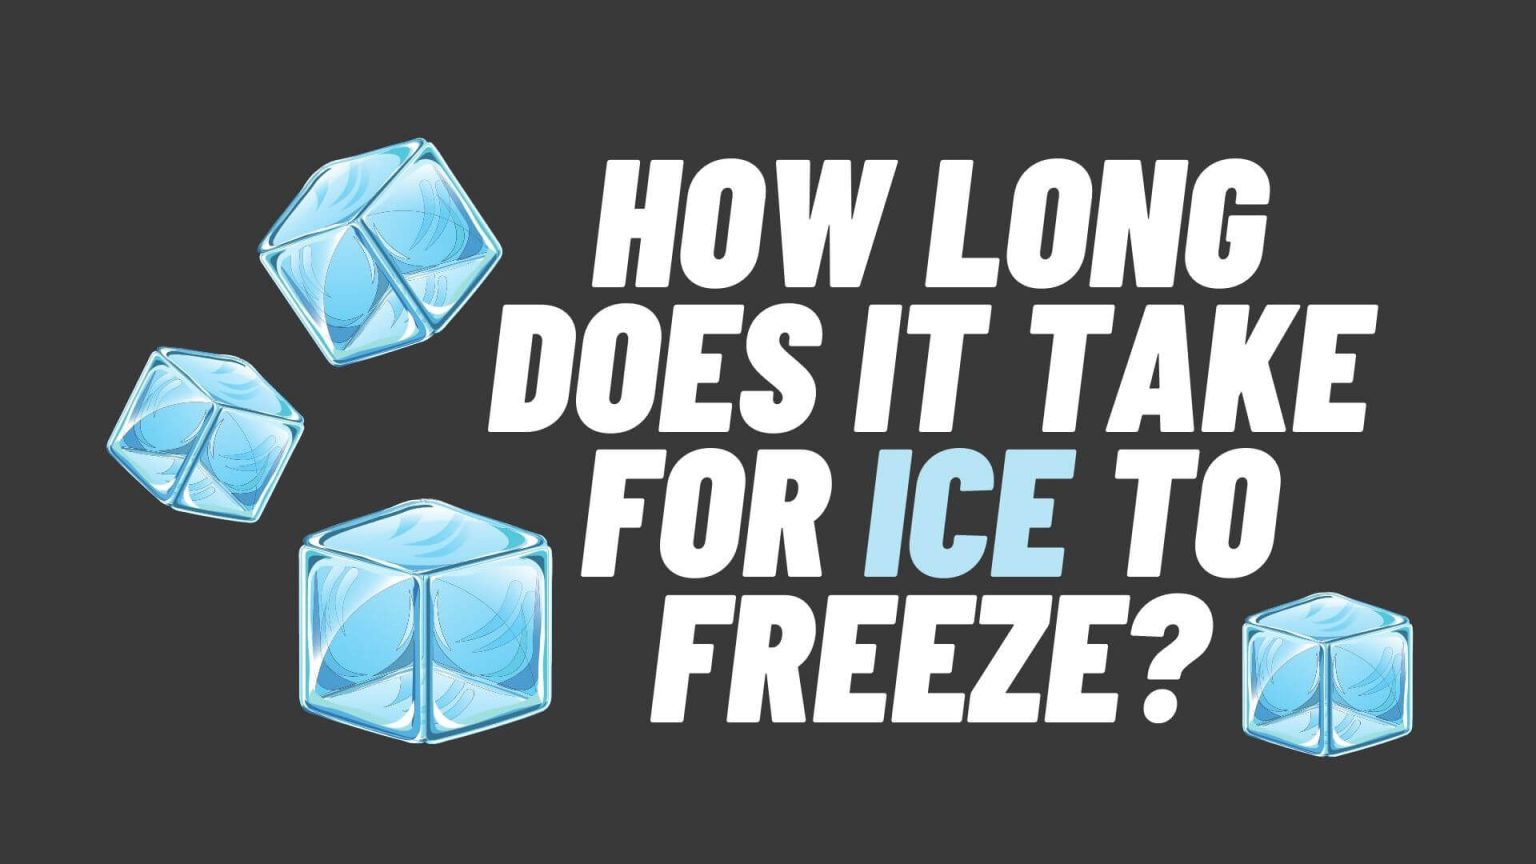 How Long Does It Take For Ice To Freeze?